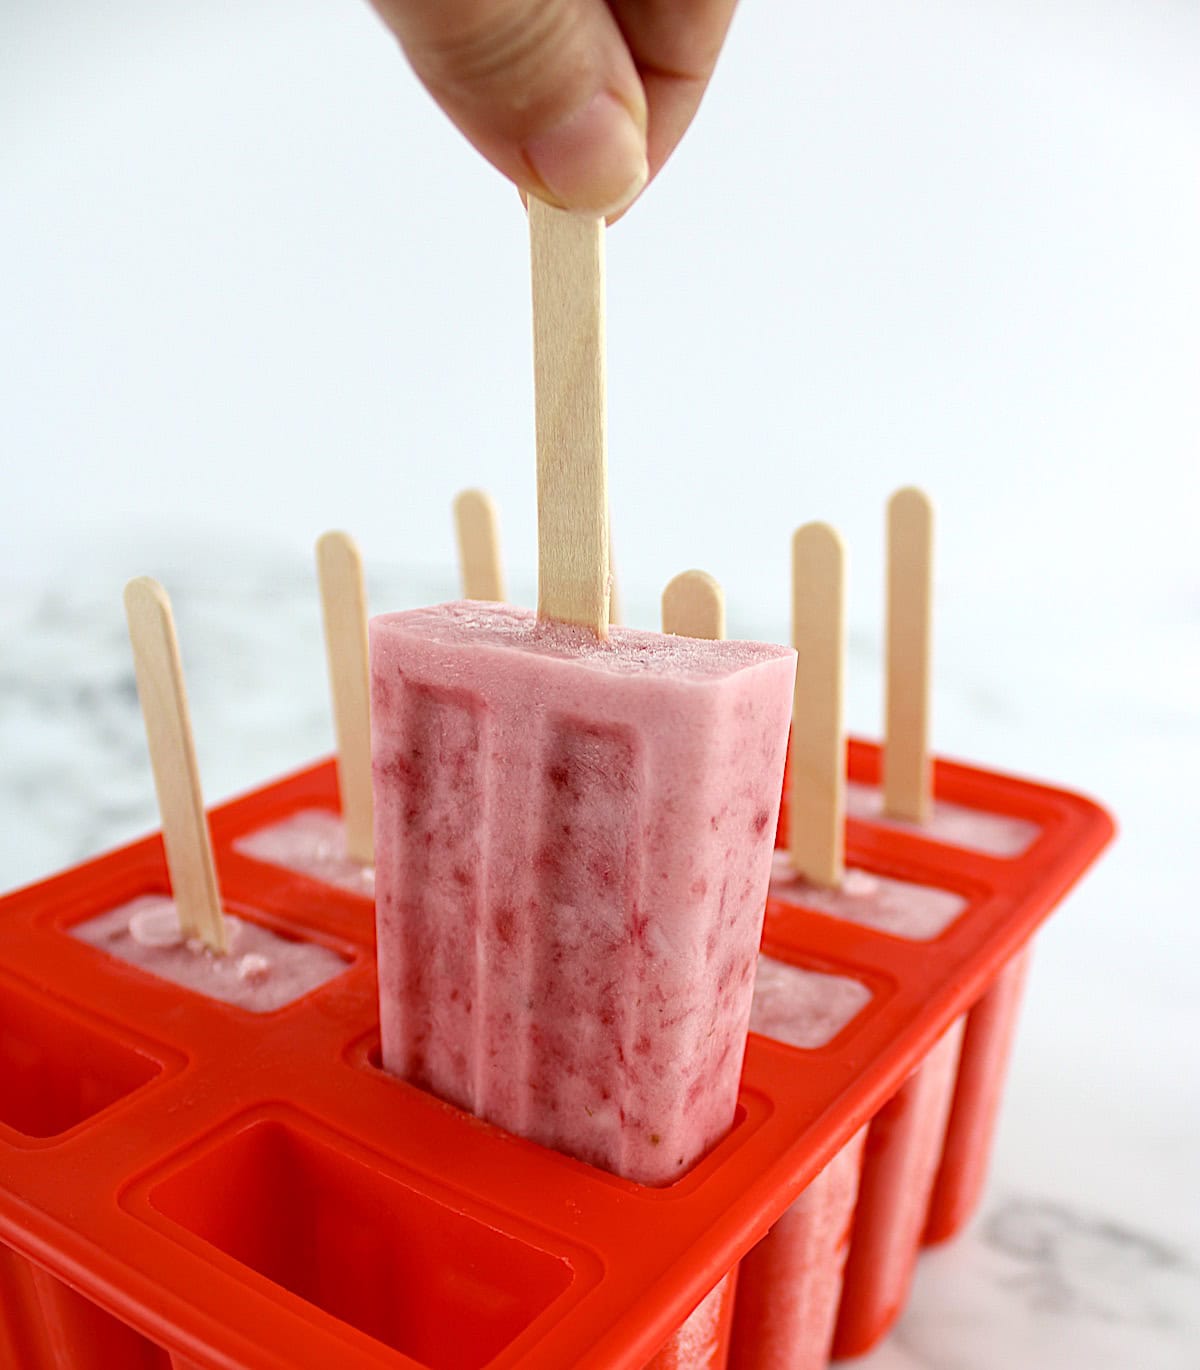 8 Strawberry Coconut Cream Popsicles in red popsicle mold with front popsicle being pulled up